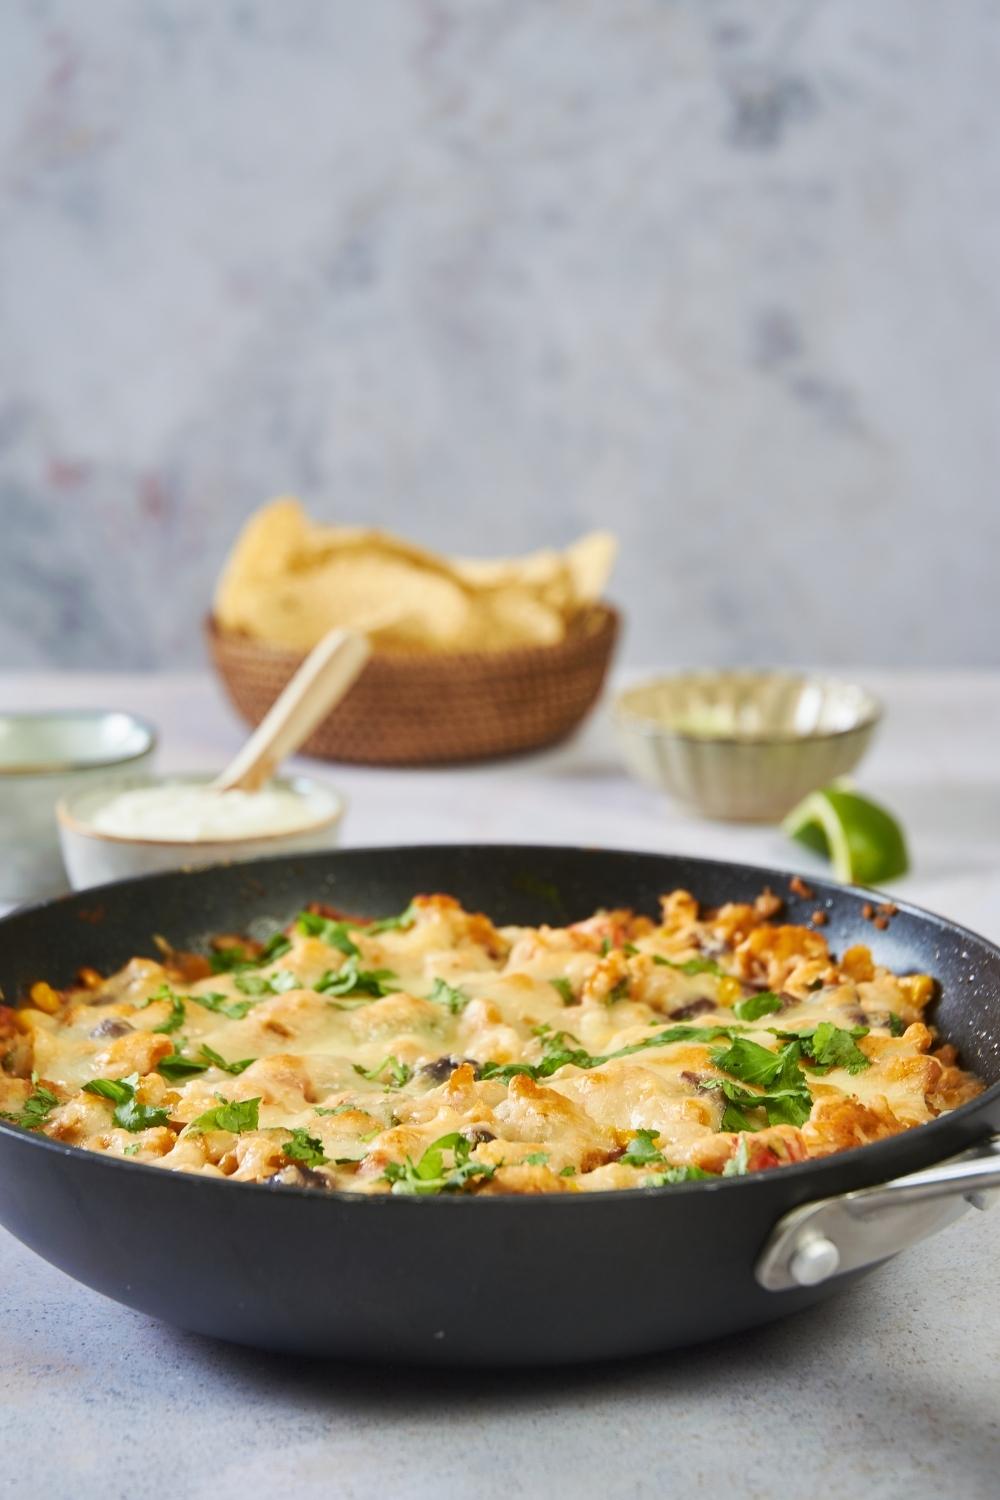 A black skillet filled with ground turkey, melted cheese, and cilantro. There are other topping ingredients in the background.